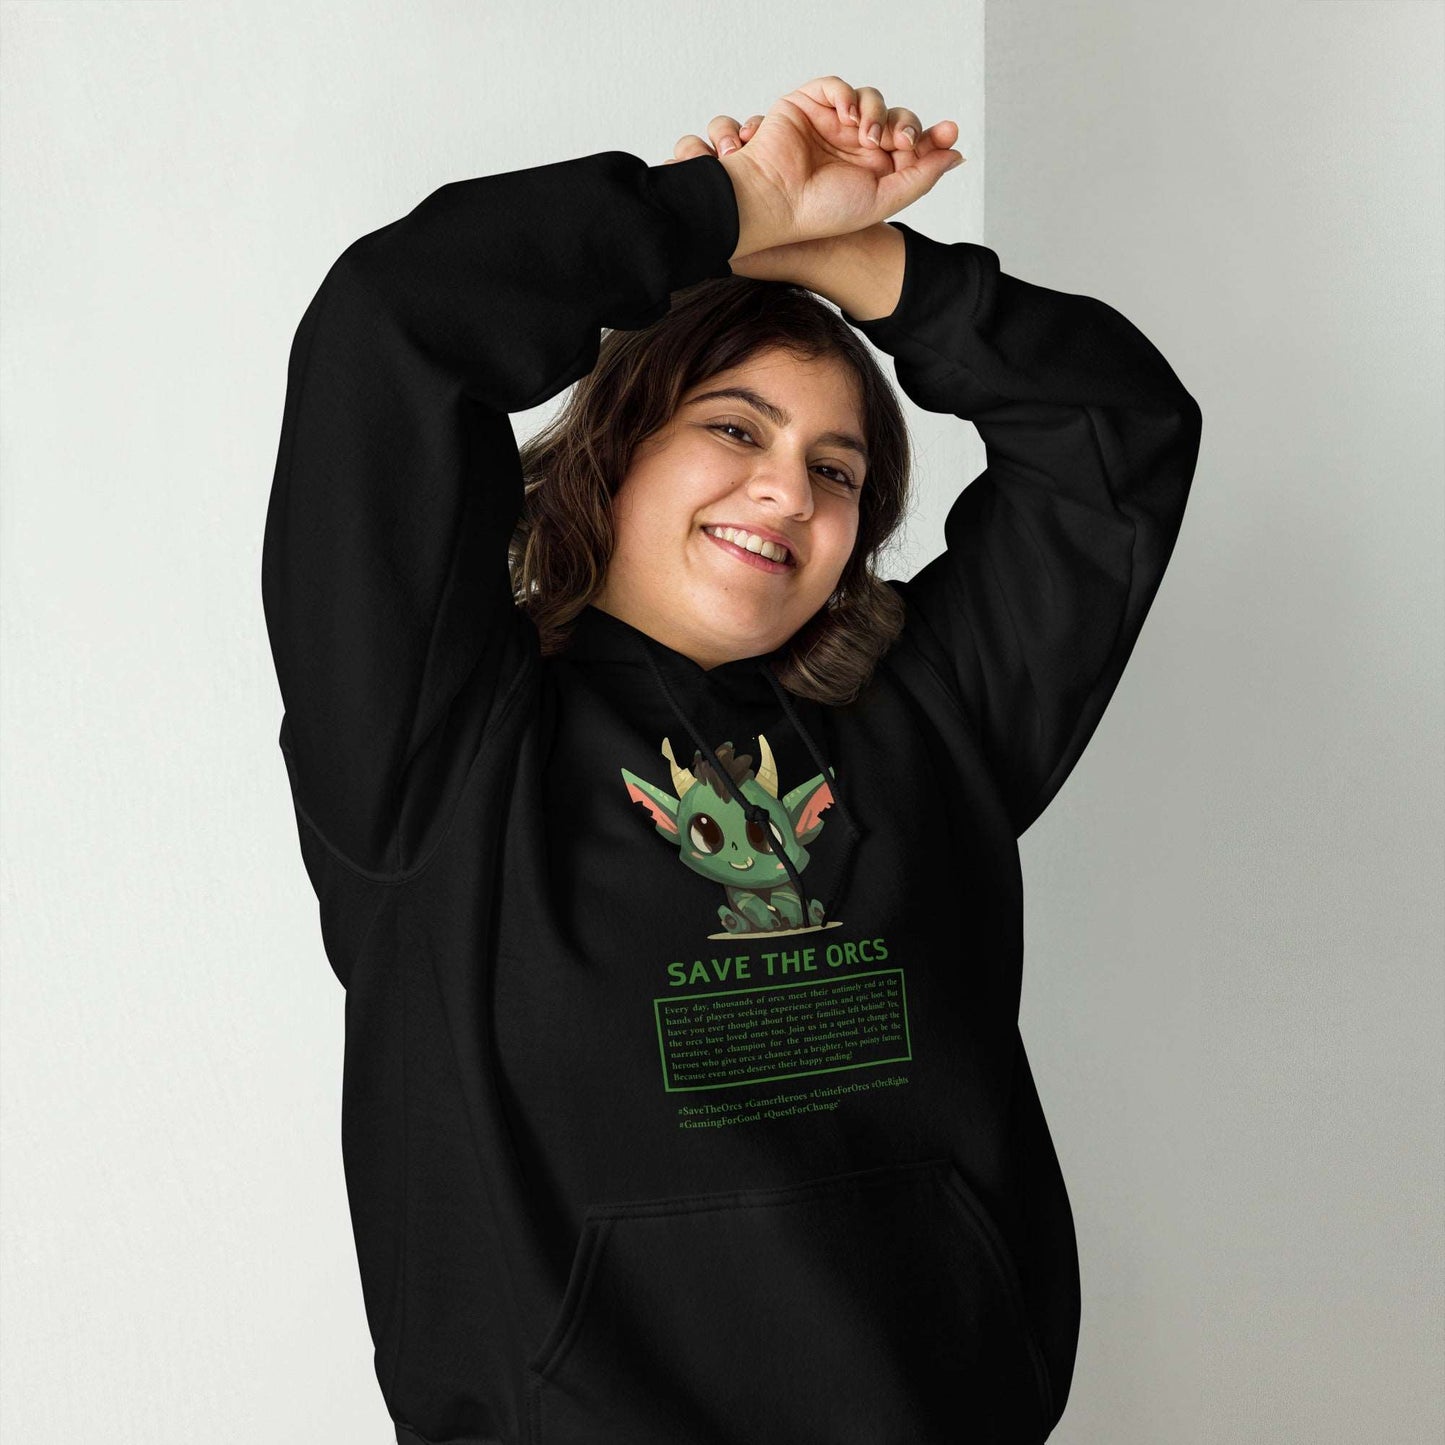 Orc Guardians: 'Save the Orcs' Gaming Hoodie